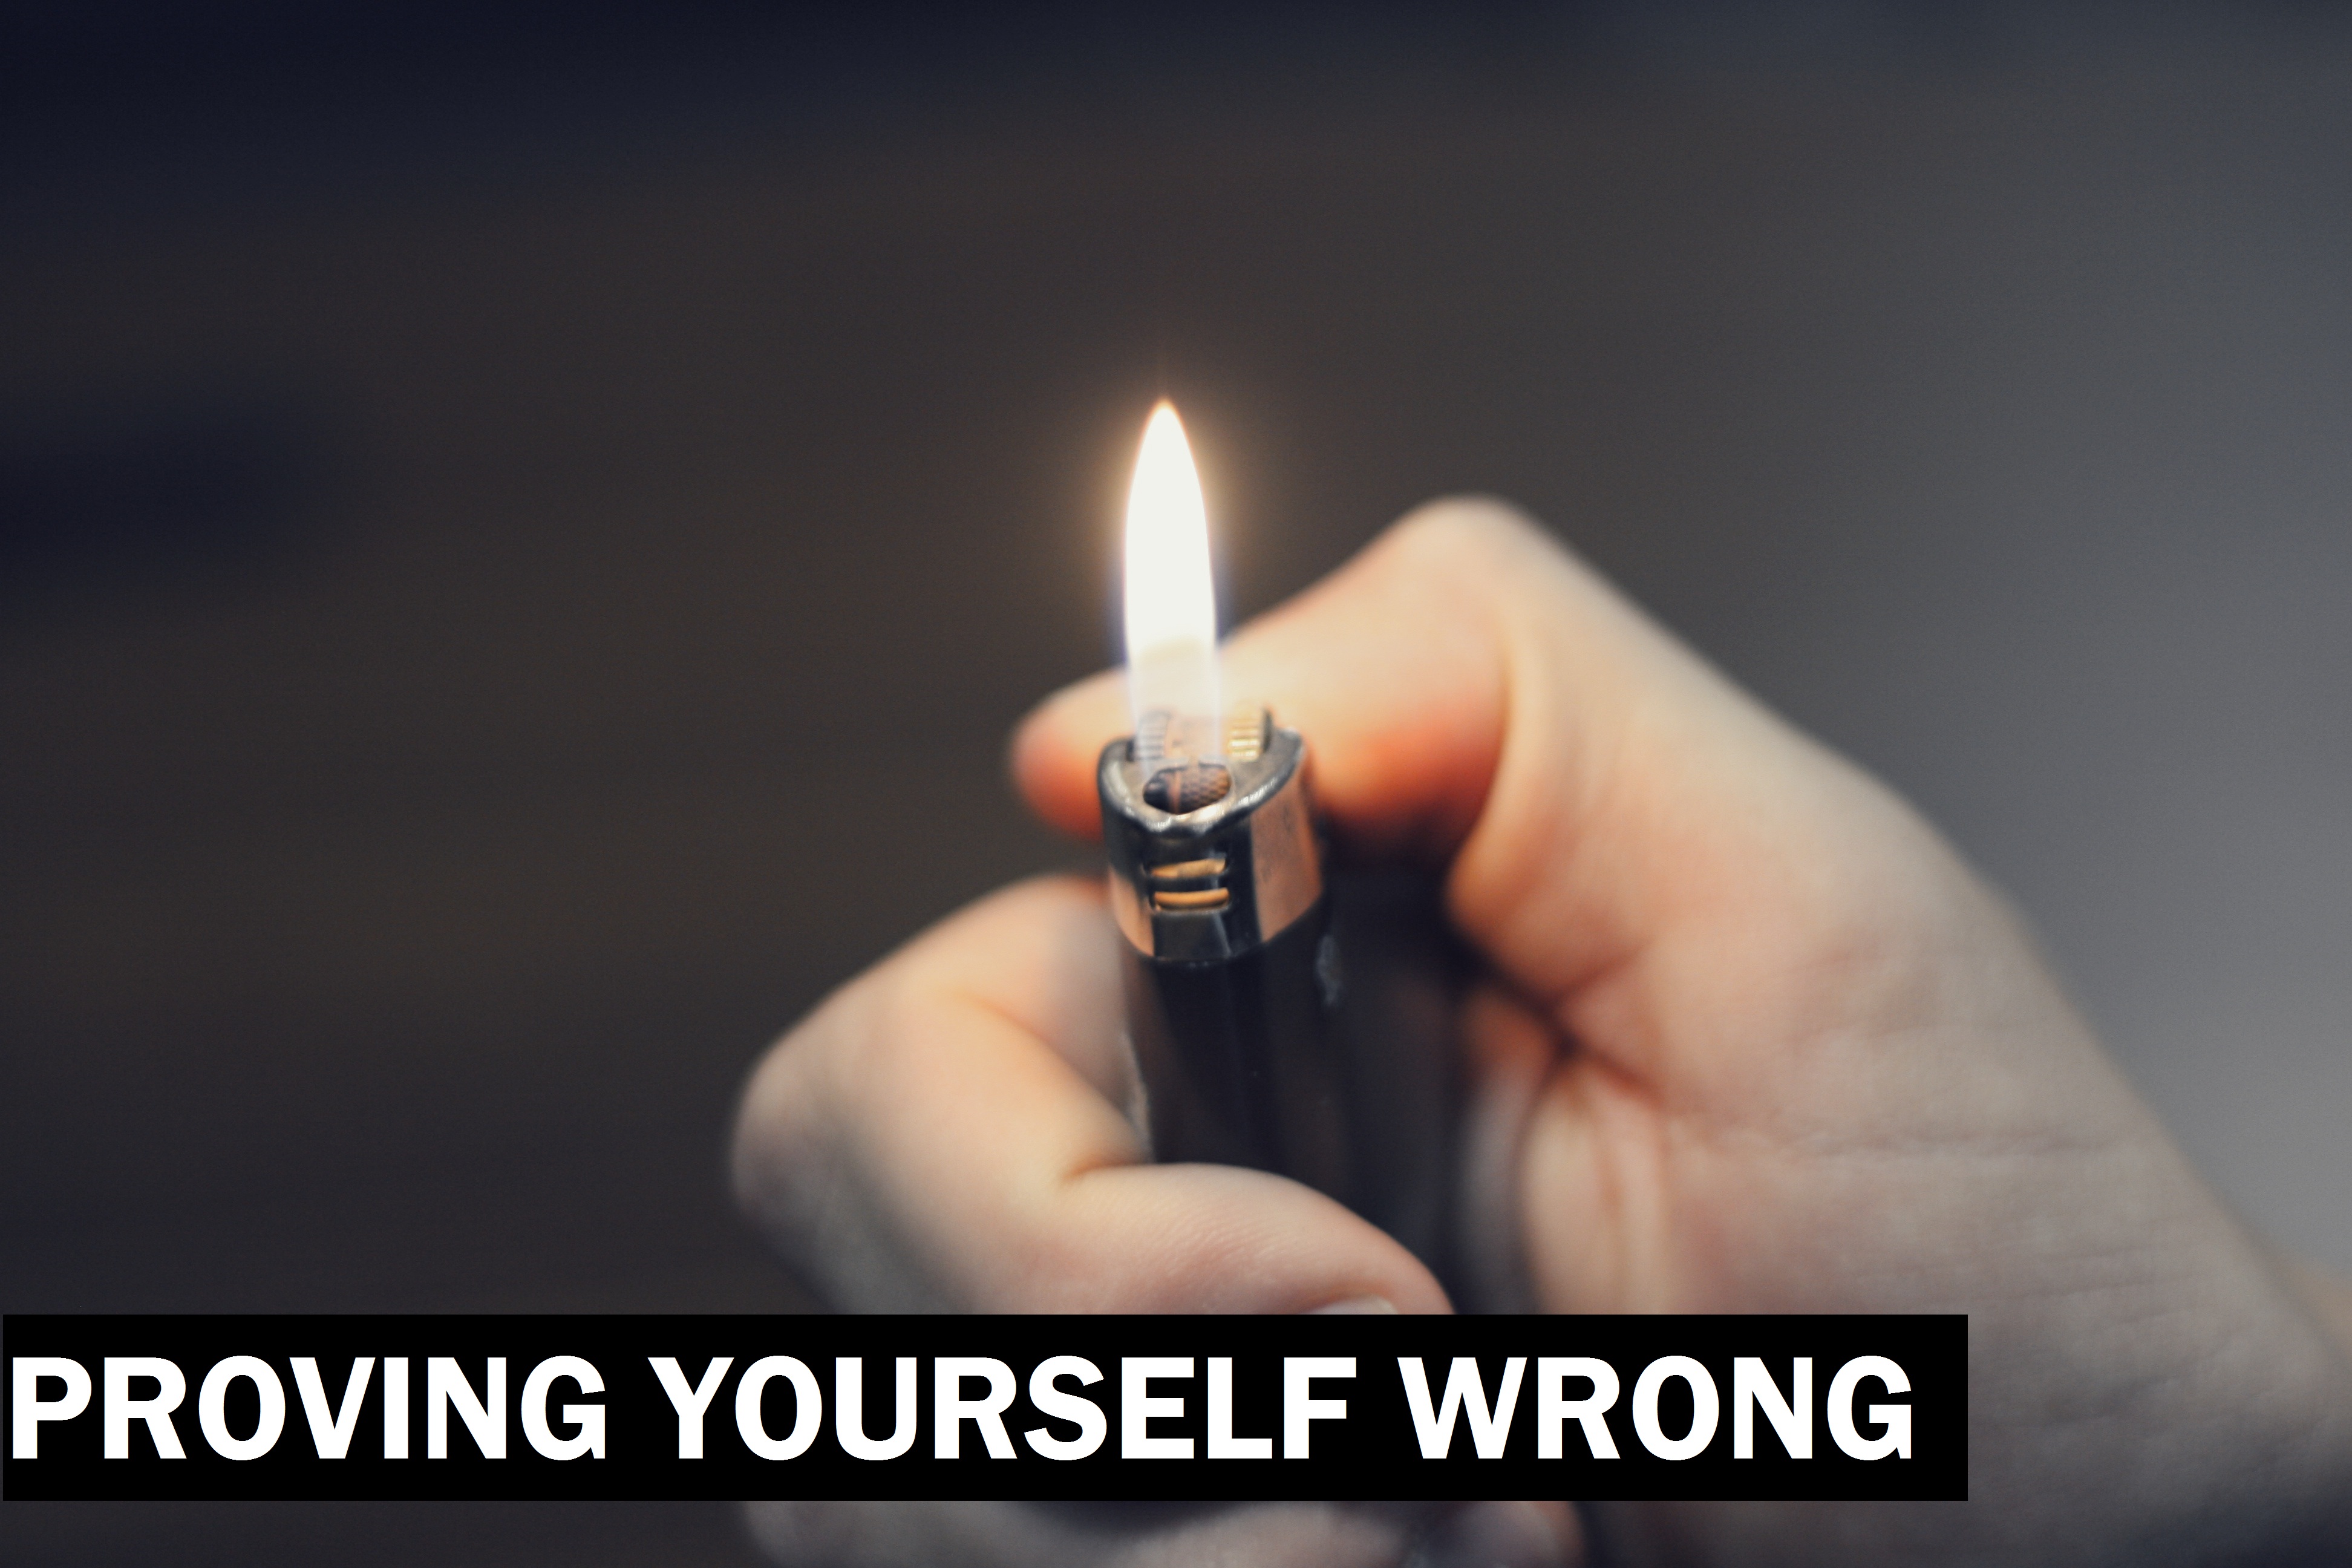 Proving yourself wrong